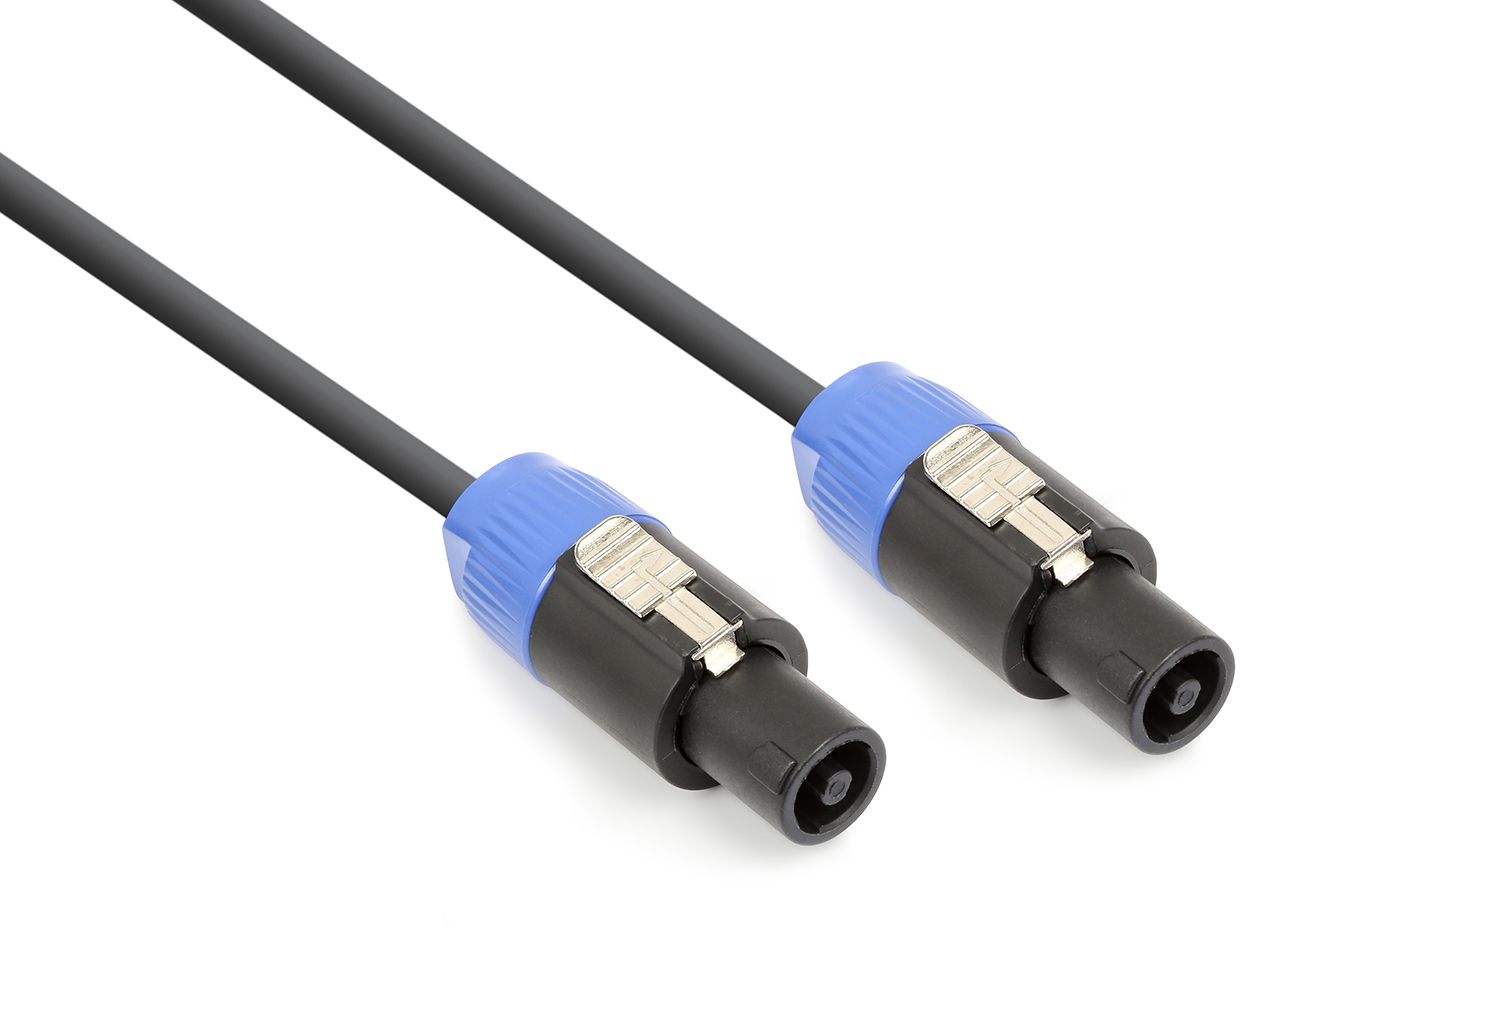 What Are The Different Types of Audio Connecters? - Find Out Here